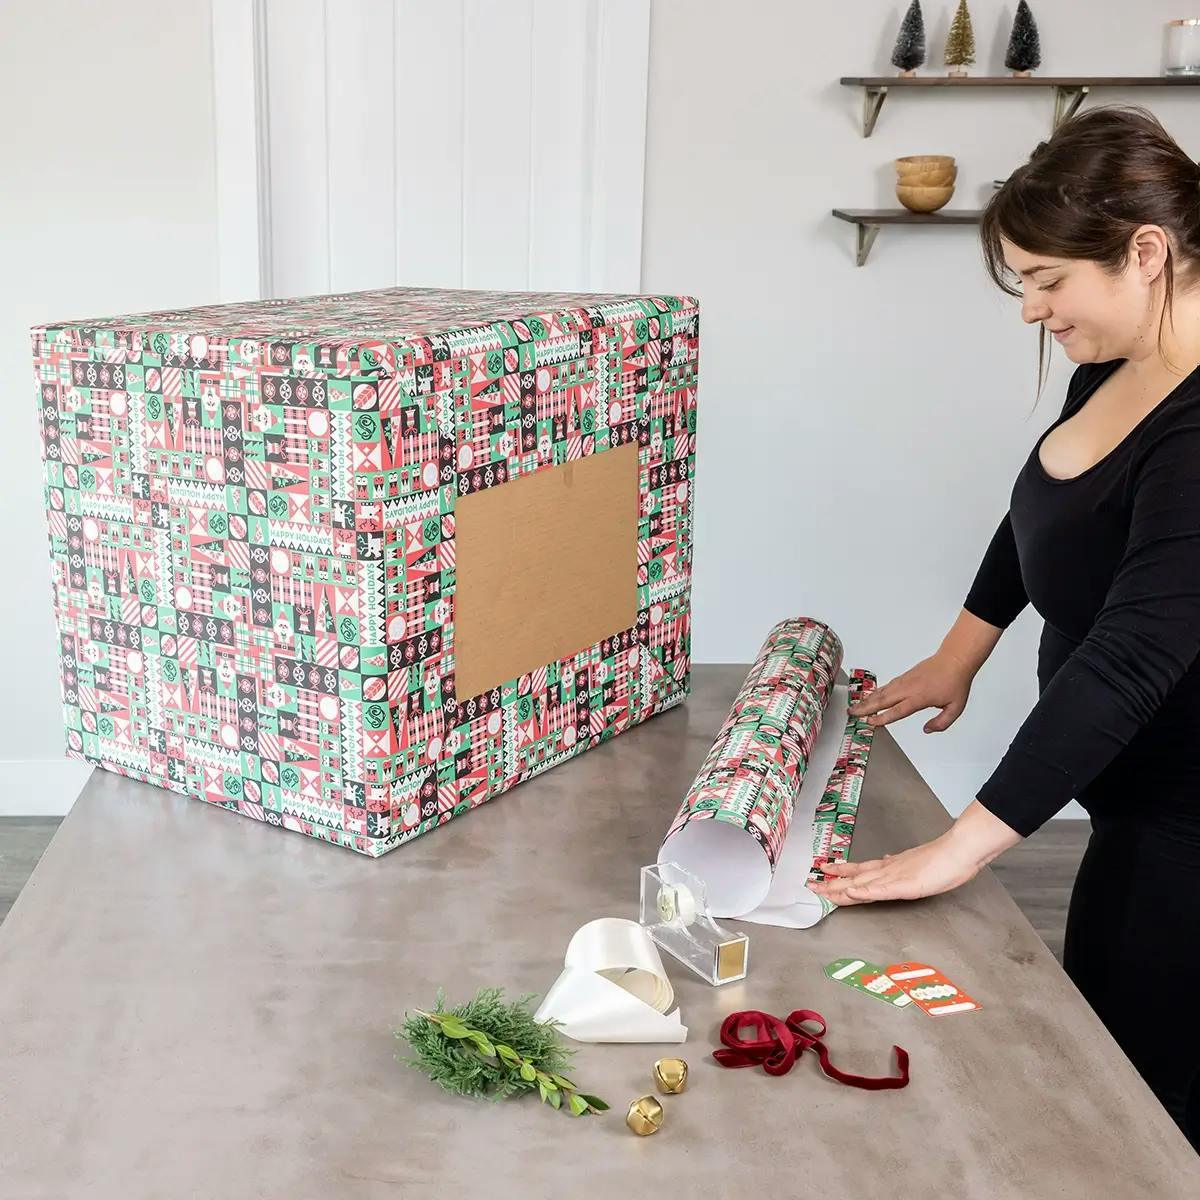 Folding the edge of the wrapping paper to make a neat edge when wrapping a large box.